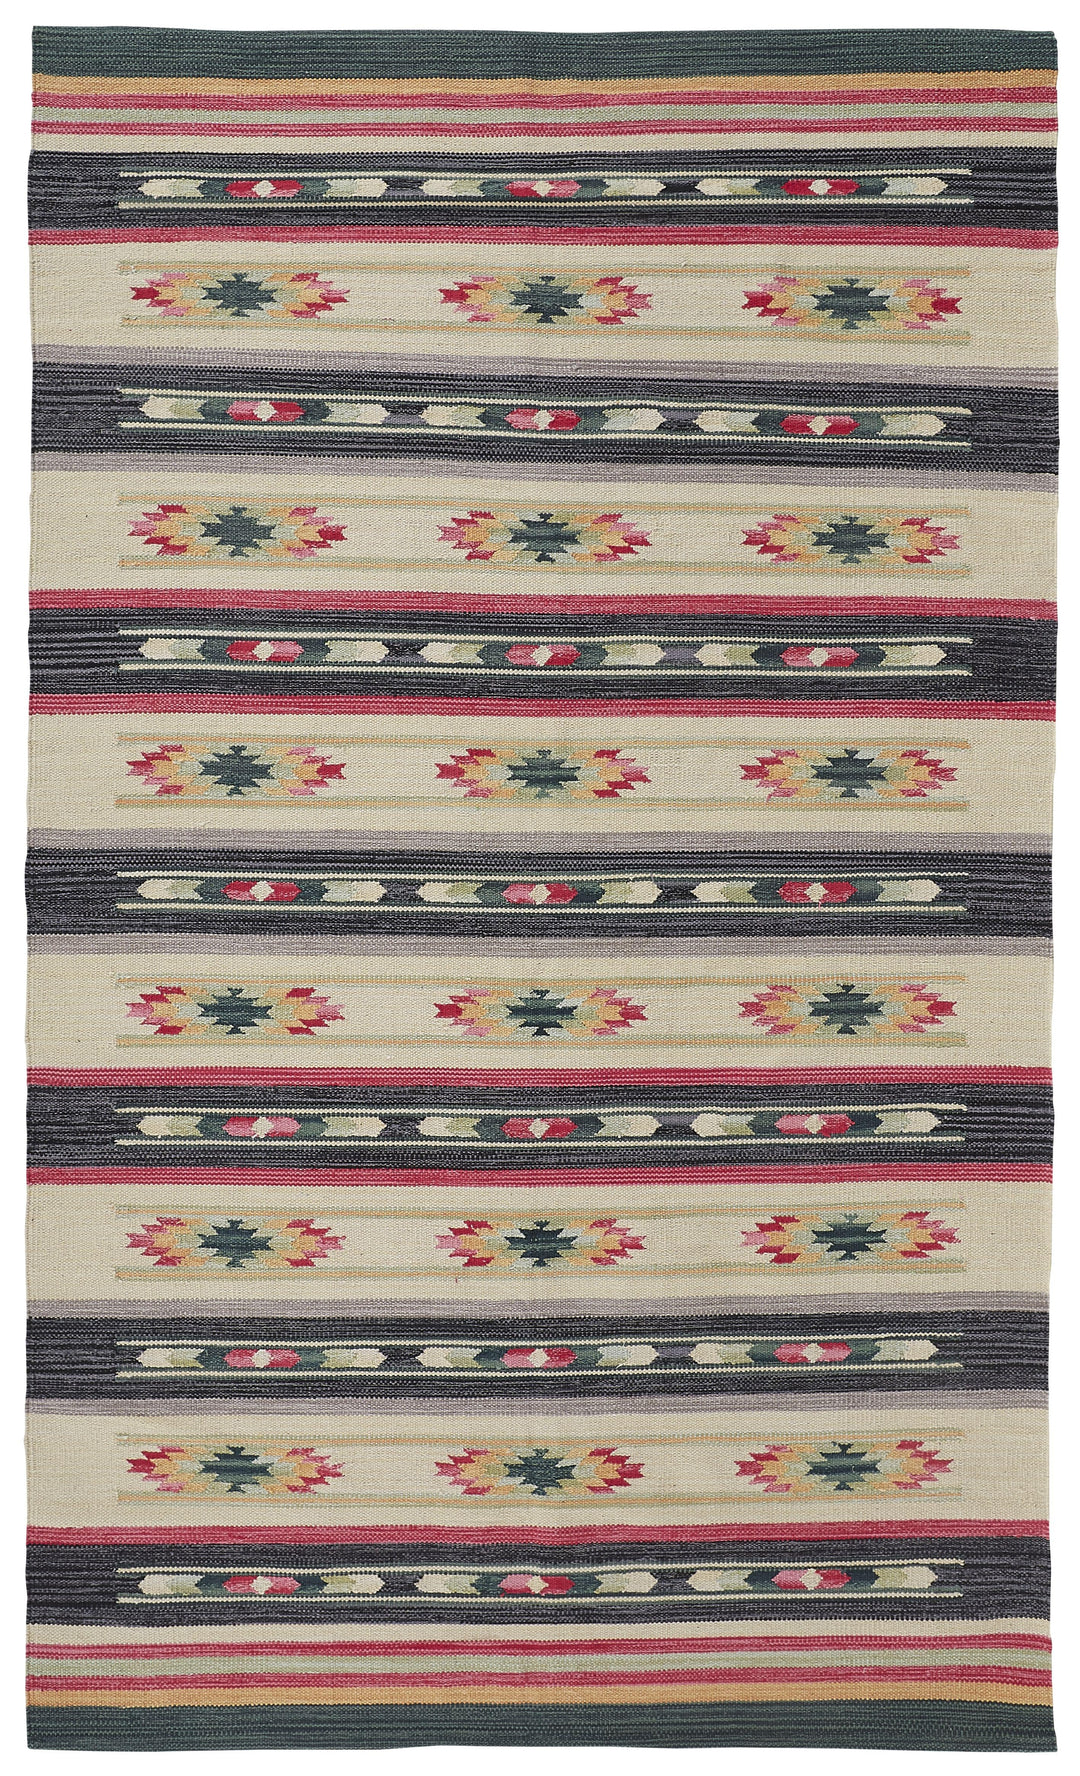 Feizy Feizy Gallvin Navajo Style Ganado Kilim Pattern Rug - Black - Available in 2 Sizes